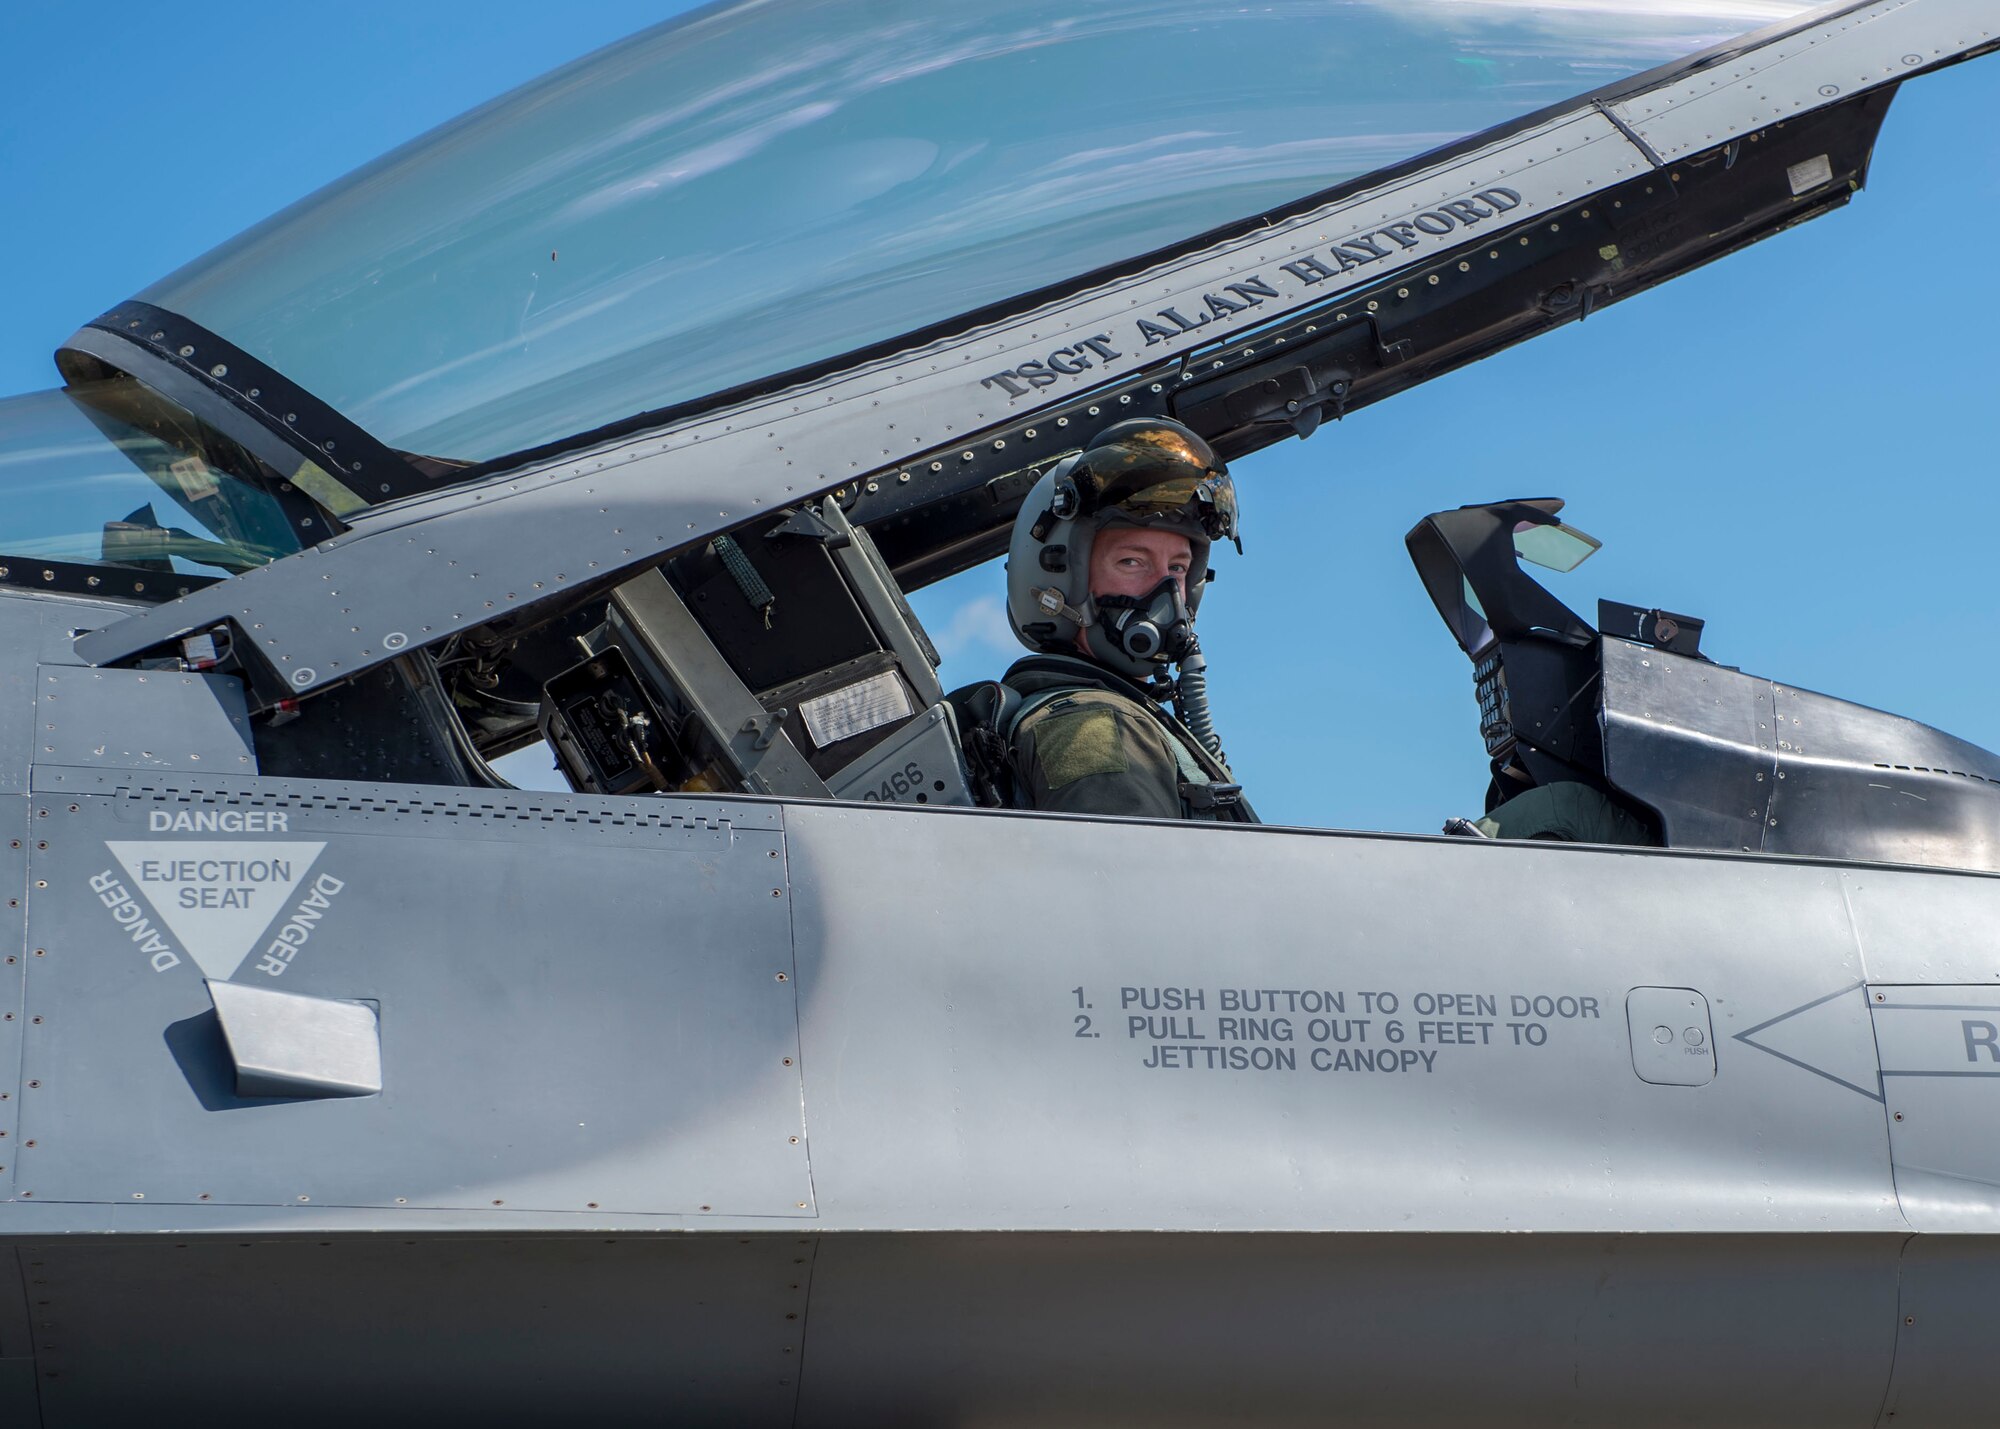 U.S. Air Force Capt. Nicholas Atkins, 8th Fighter Squadron F-16 Basic-Course student pilot, poses for a photo after a flight, April 9, 2019, on Naval Air Station Joint Reserve Base New Orleans, La. Flying over open water was one of the experiences the students had the opportunity to do while they were on  the temporary duty assignment to NAS JRB New Orleans. (U.S. Air Force photo by Airman 1st Class Kindra Stewart)